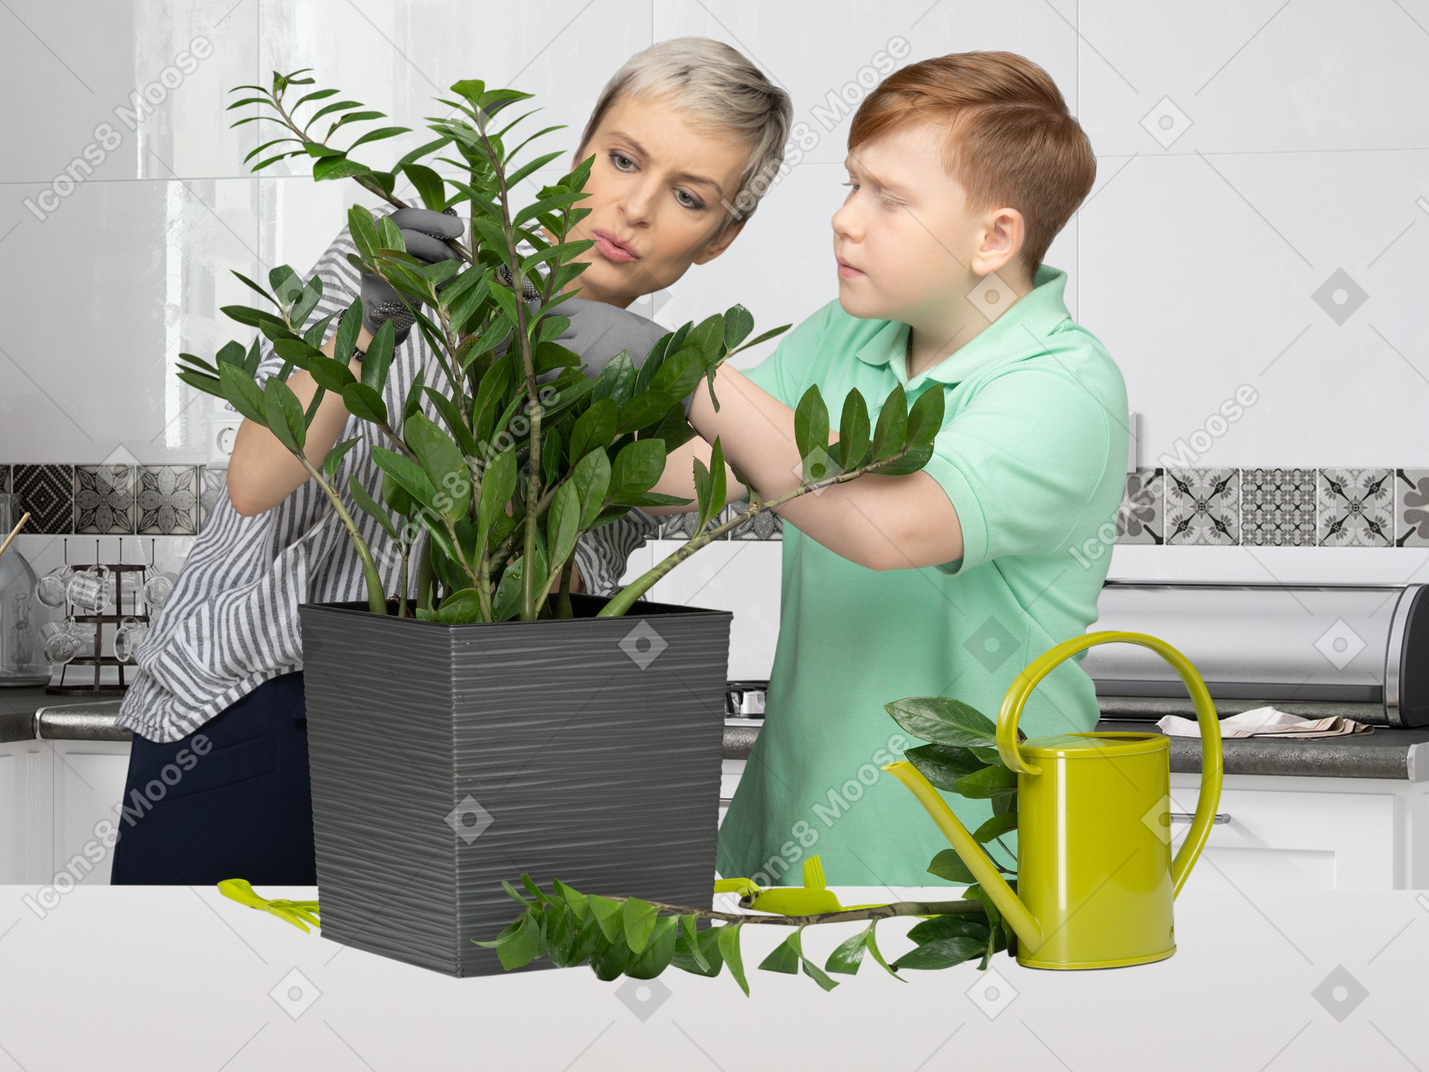 A young boy with a watering can cleaning the kitchen